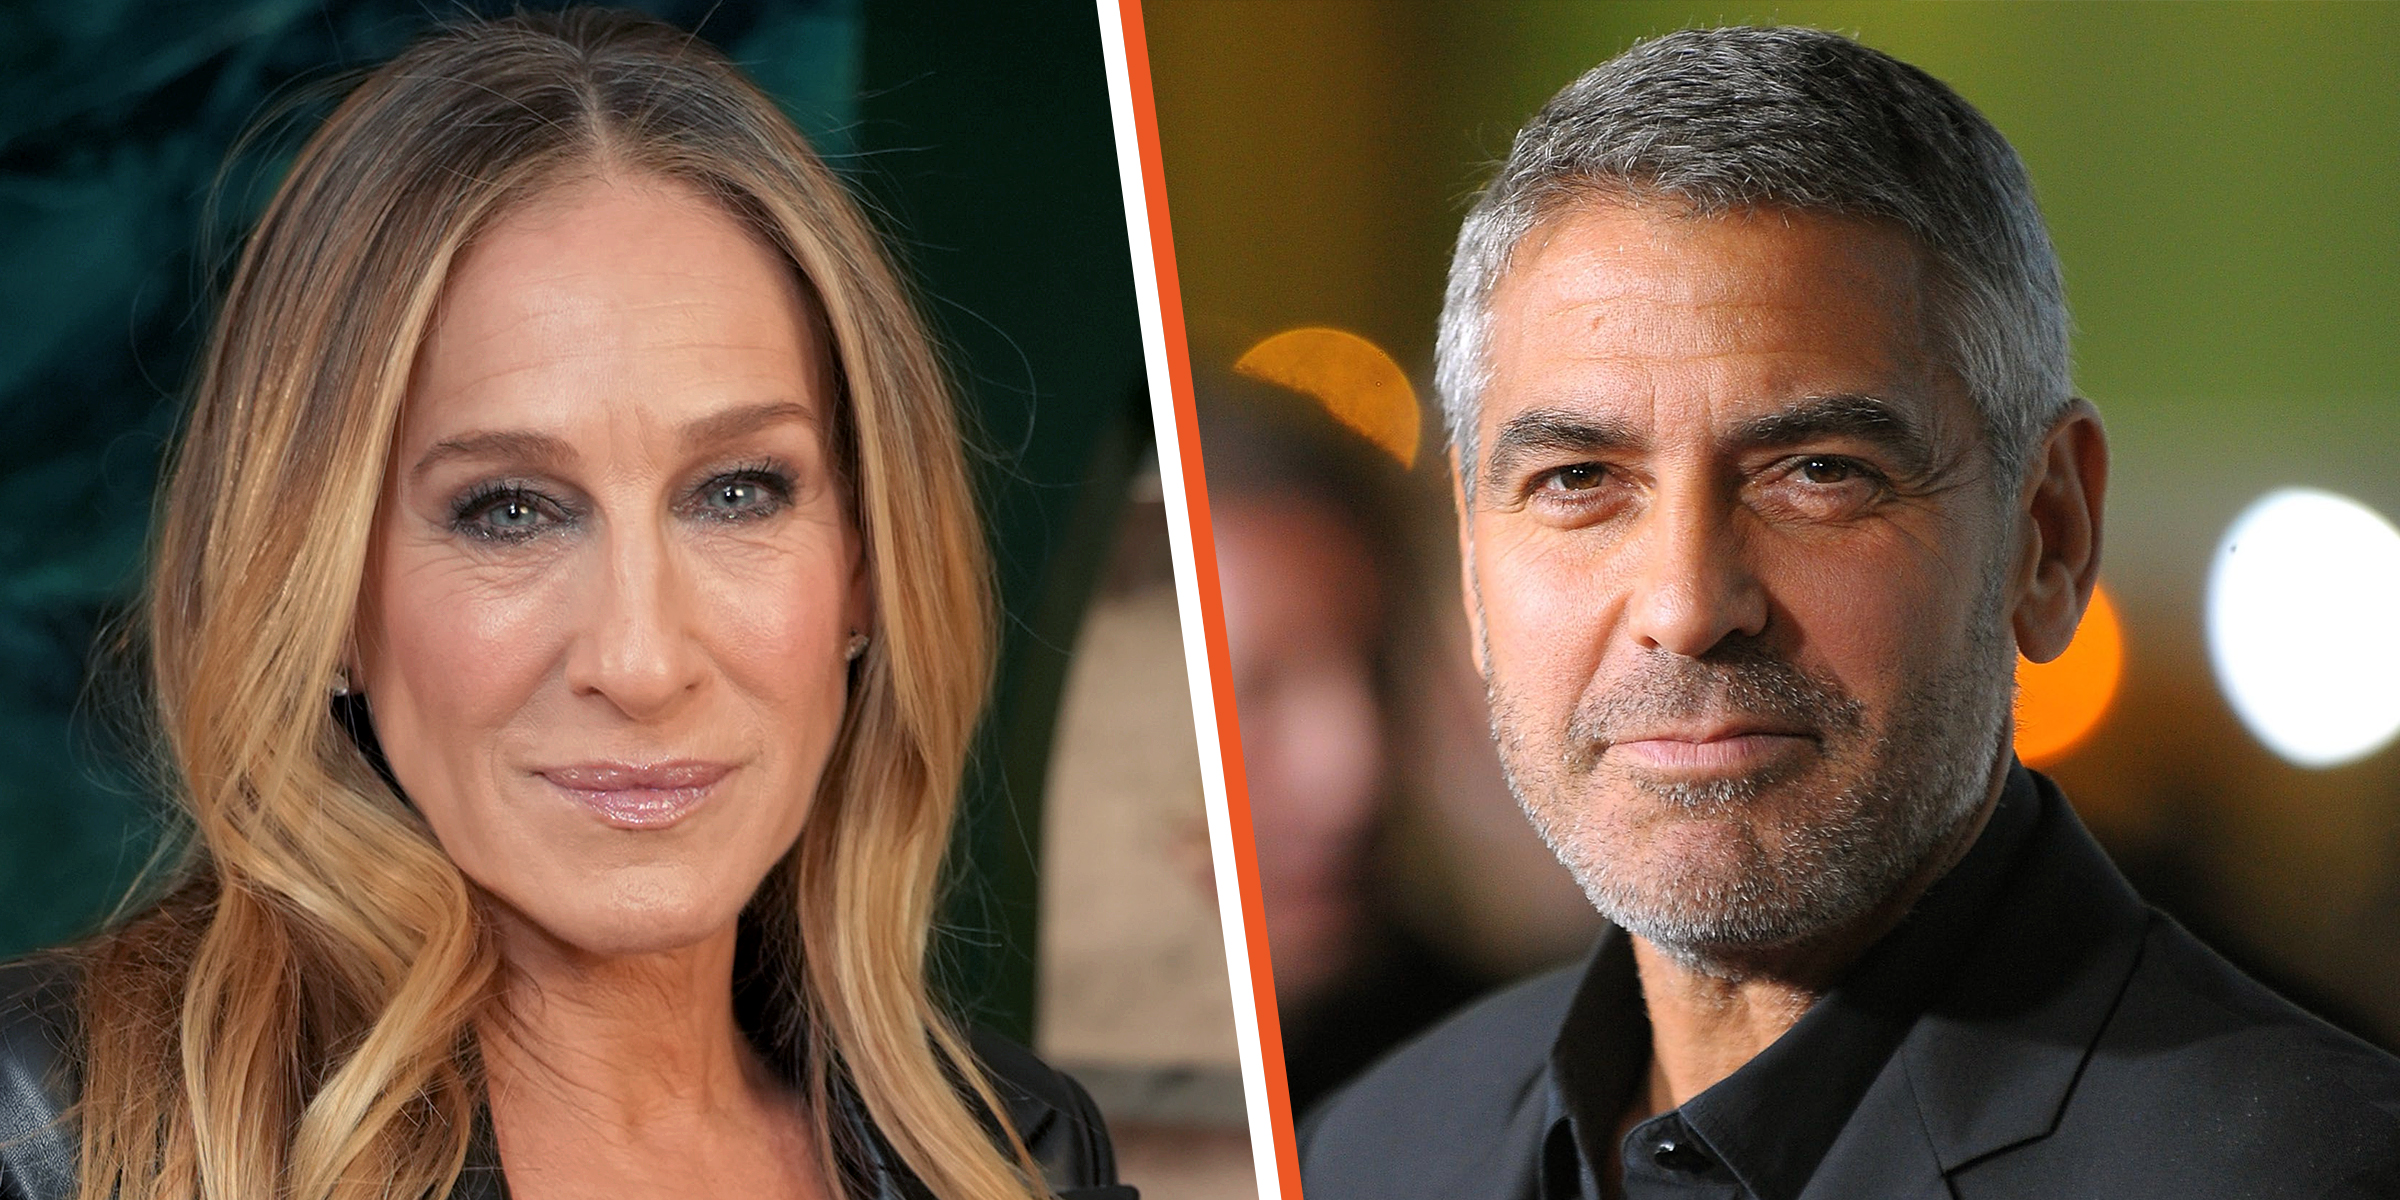 Sarah-Jessica Parker and George Clooney | Source: Getty Images